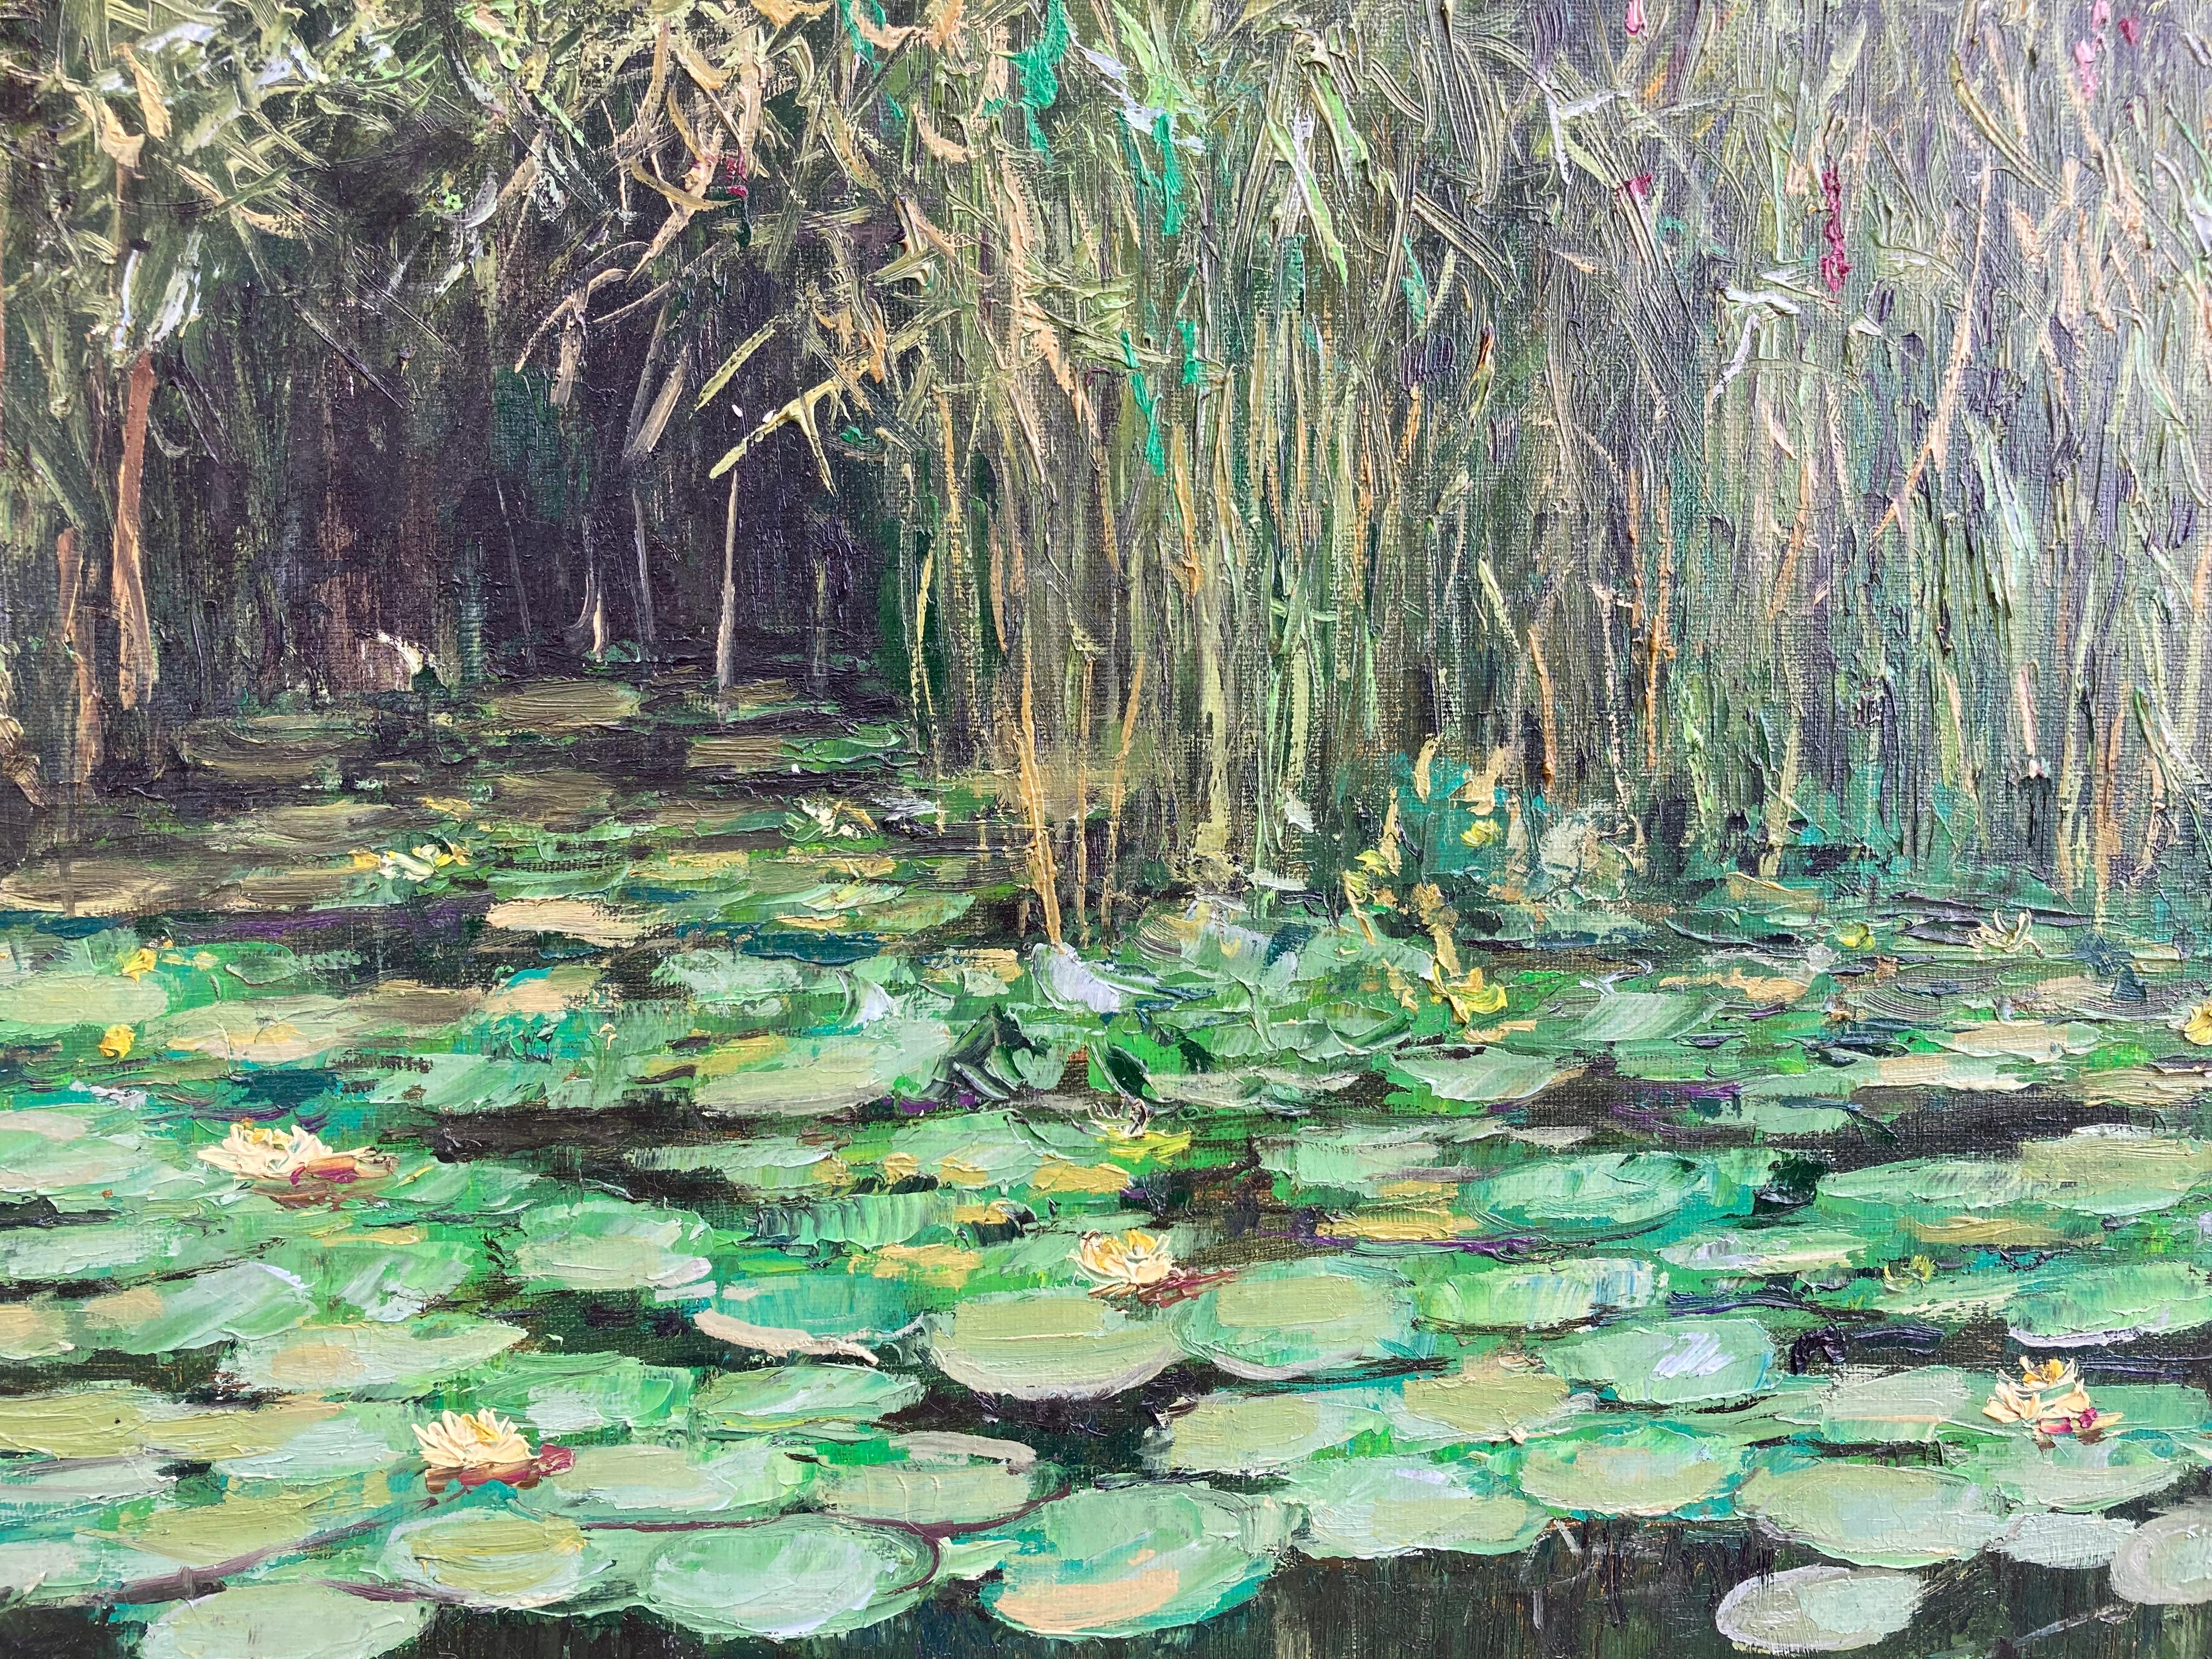 A stunning rendering of water lilies with flowers and reeds, by a Russian artist whose name I cannot make out on the back of the canvas - I was buying these from Ukraine - so I have listed it as 